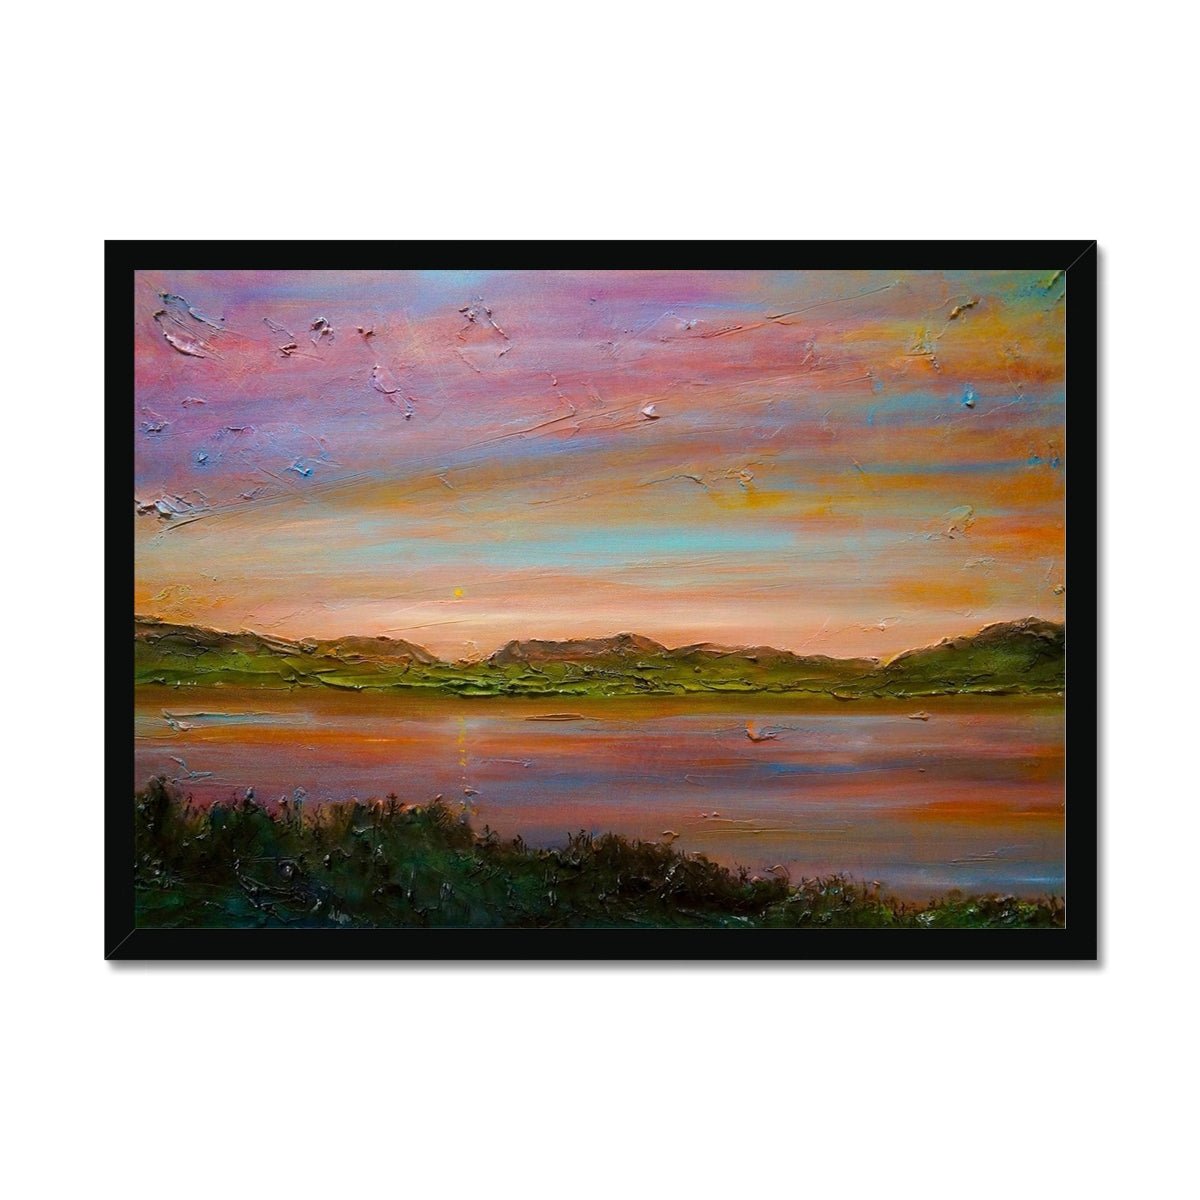 Gourock Golf Club Sunset Painting | Framed Prints From Scotland-Framed Prints-River Clyde Art Gallery-A2 Landscape-Black Frame-Paintings, Prints, Homeware, Art Gifts From Scotland By Scottish Artist Kevin Hunter